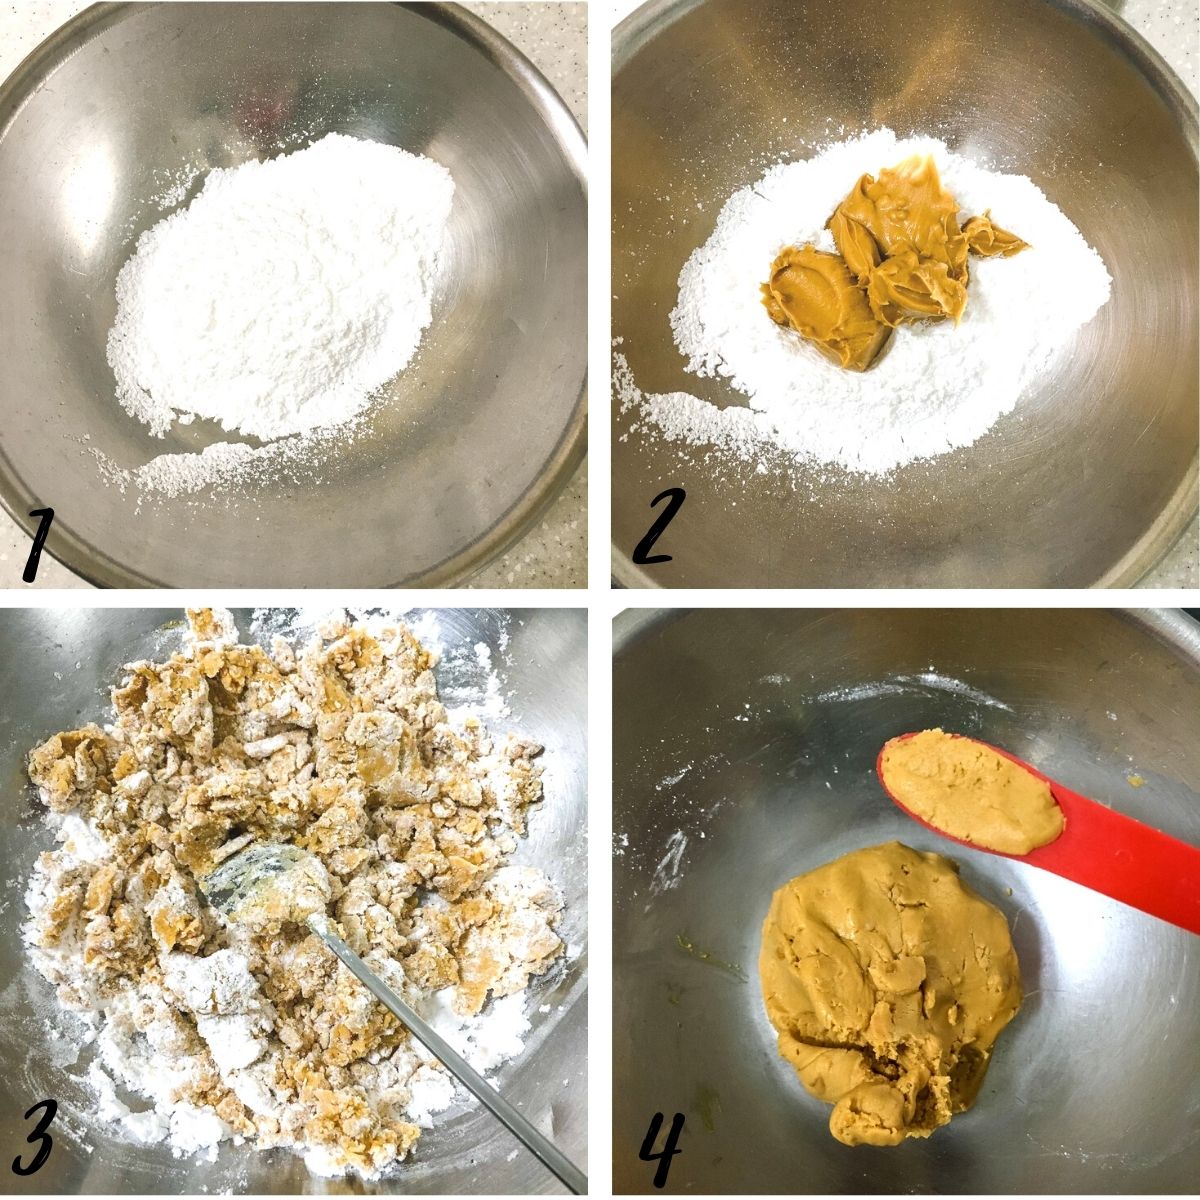 A poster of 4 images showing how to make peanut butter filling.